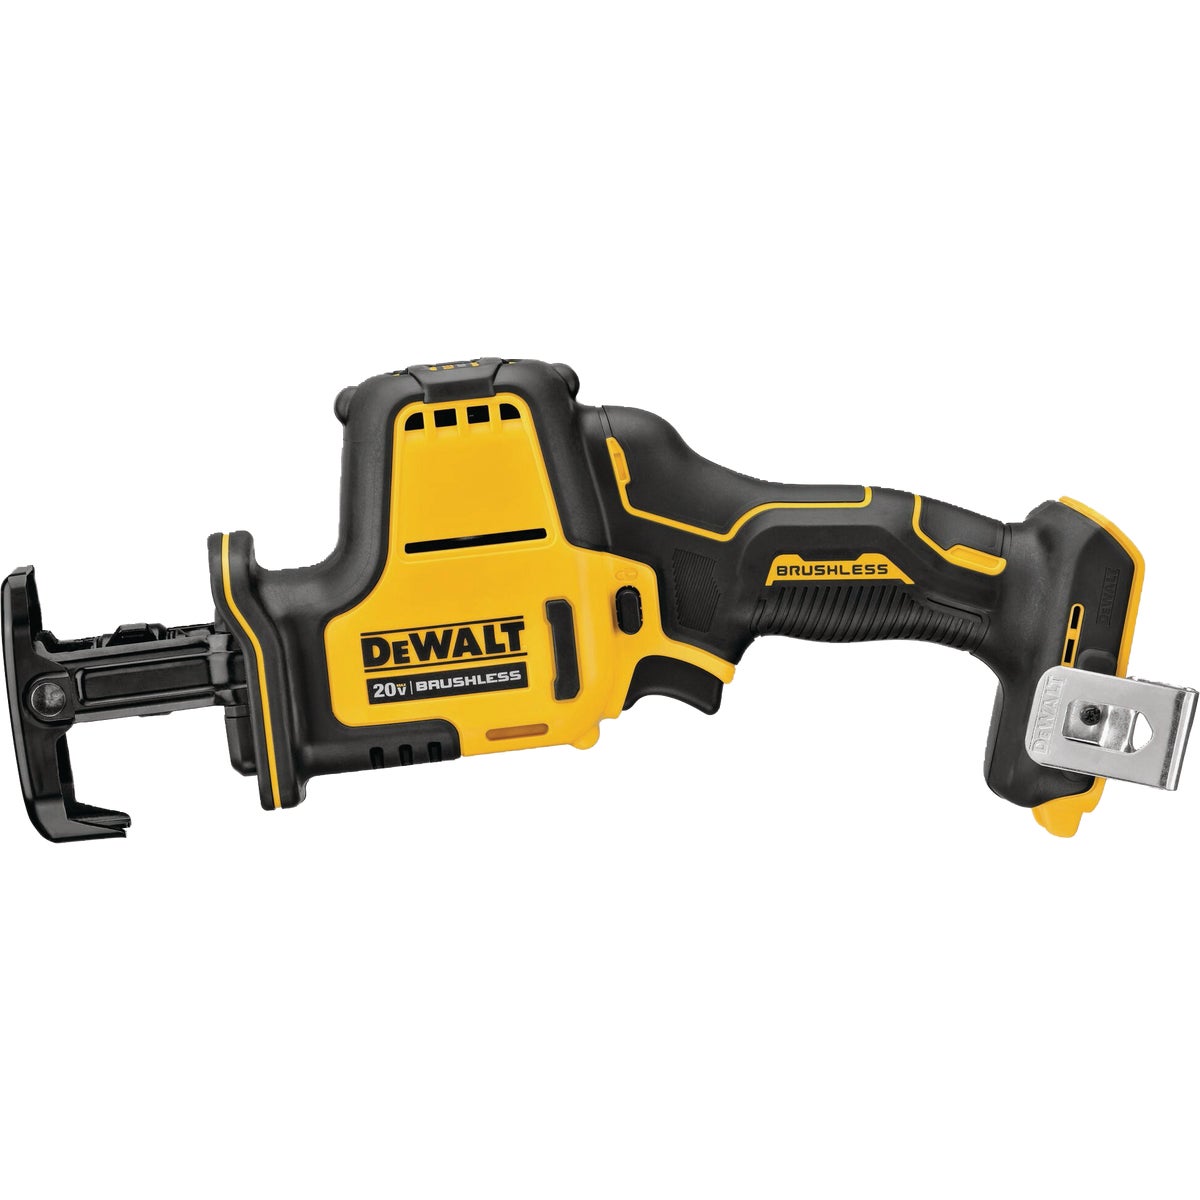 DEWALT ATOMIC 20V MAX Brushless Compact Cordless Reciprocating Saw (Tool Only)